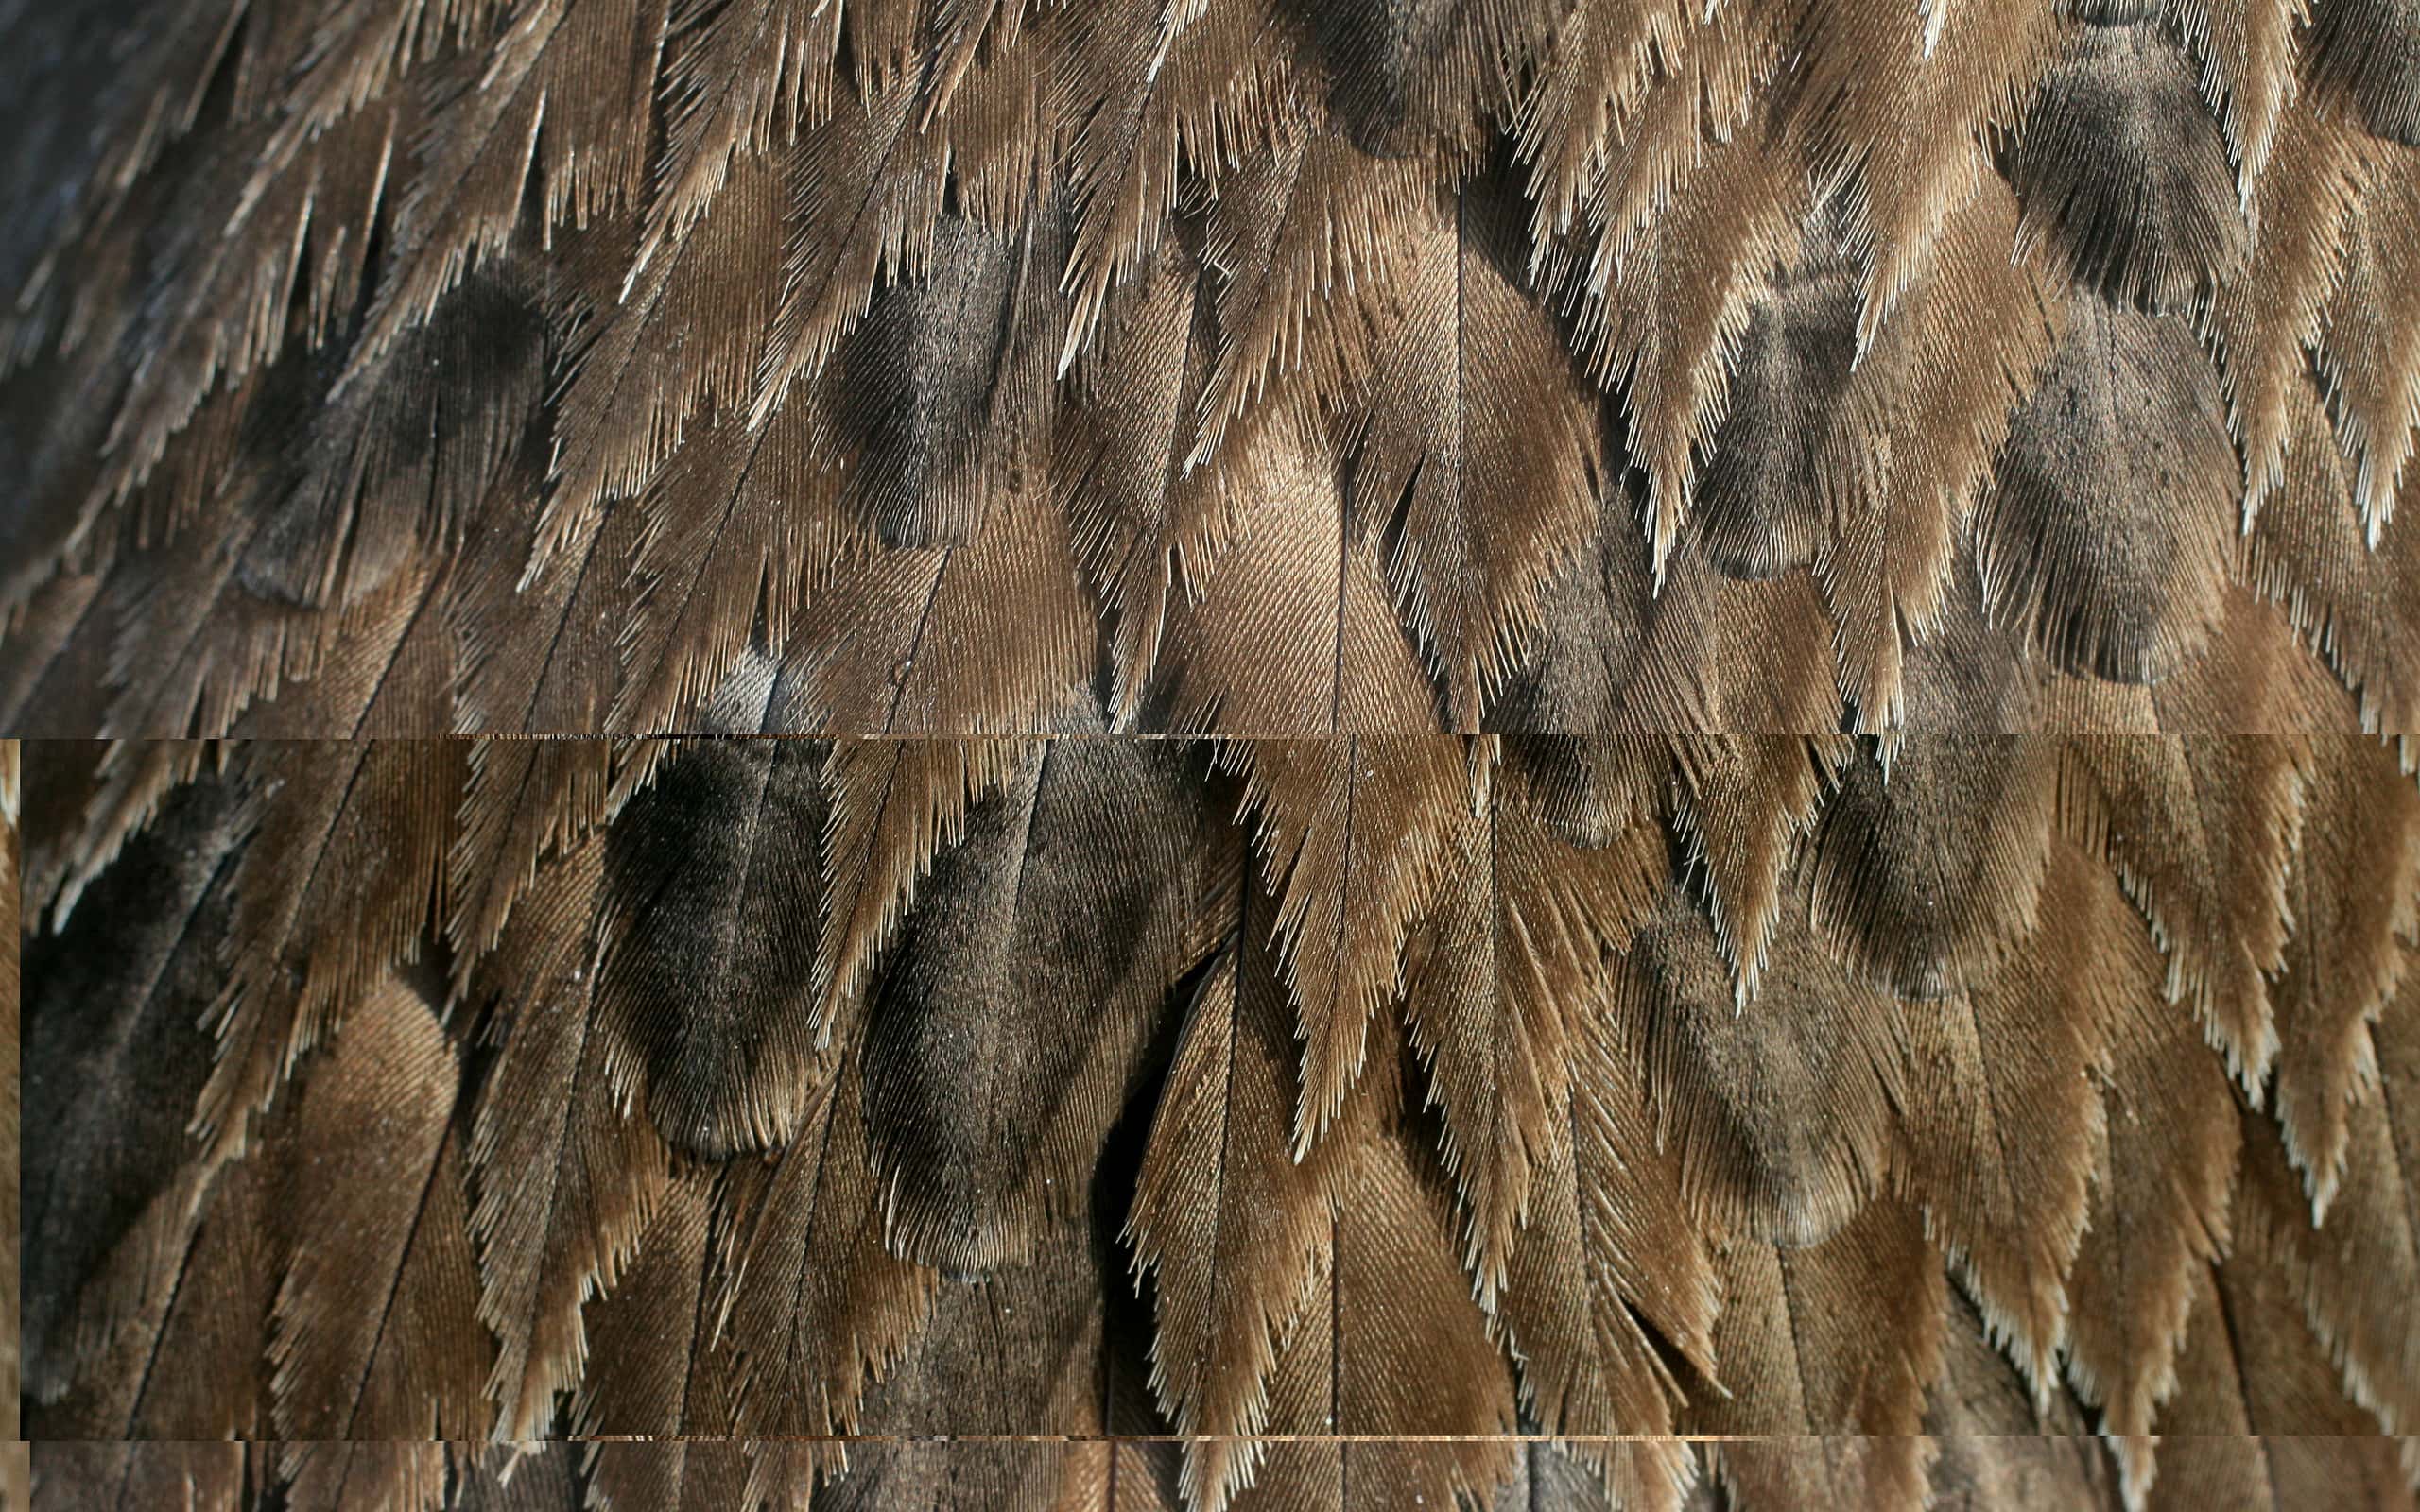 A closeup of brown pelican feathers